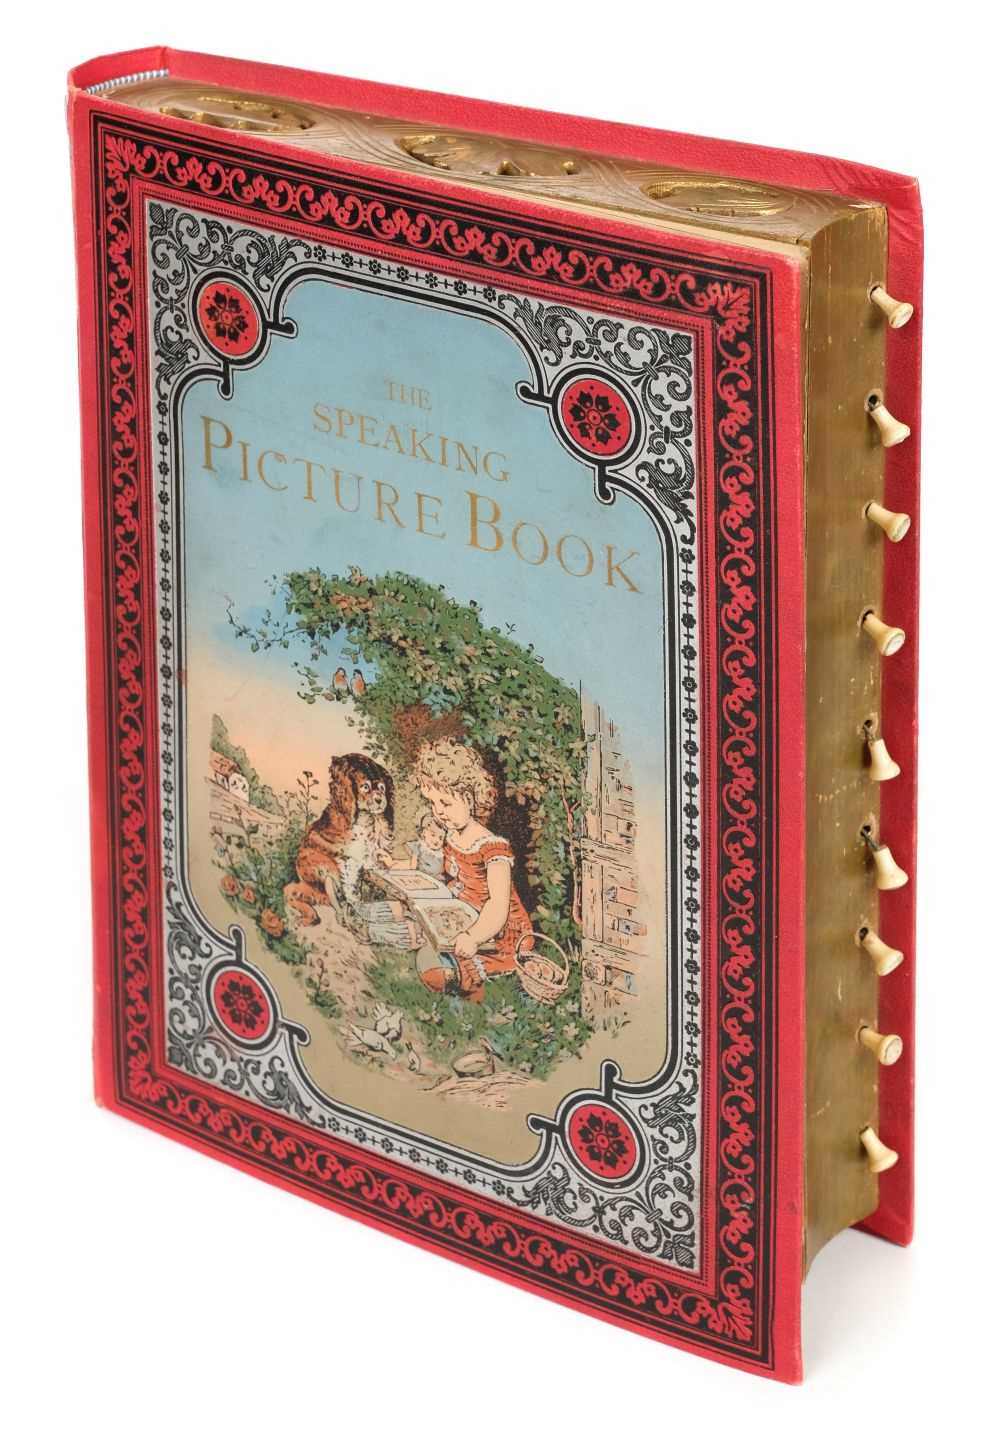 Lot 523 - The Speaking Picture Book. A New Picture Book with Characteristical Voices, circa 1880